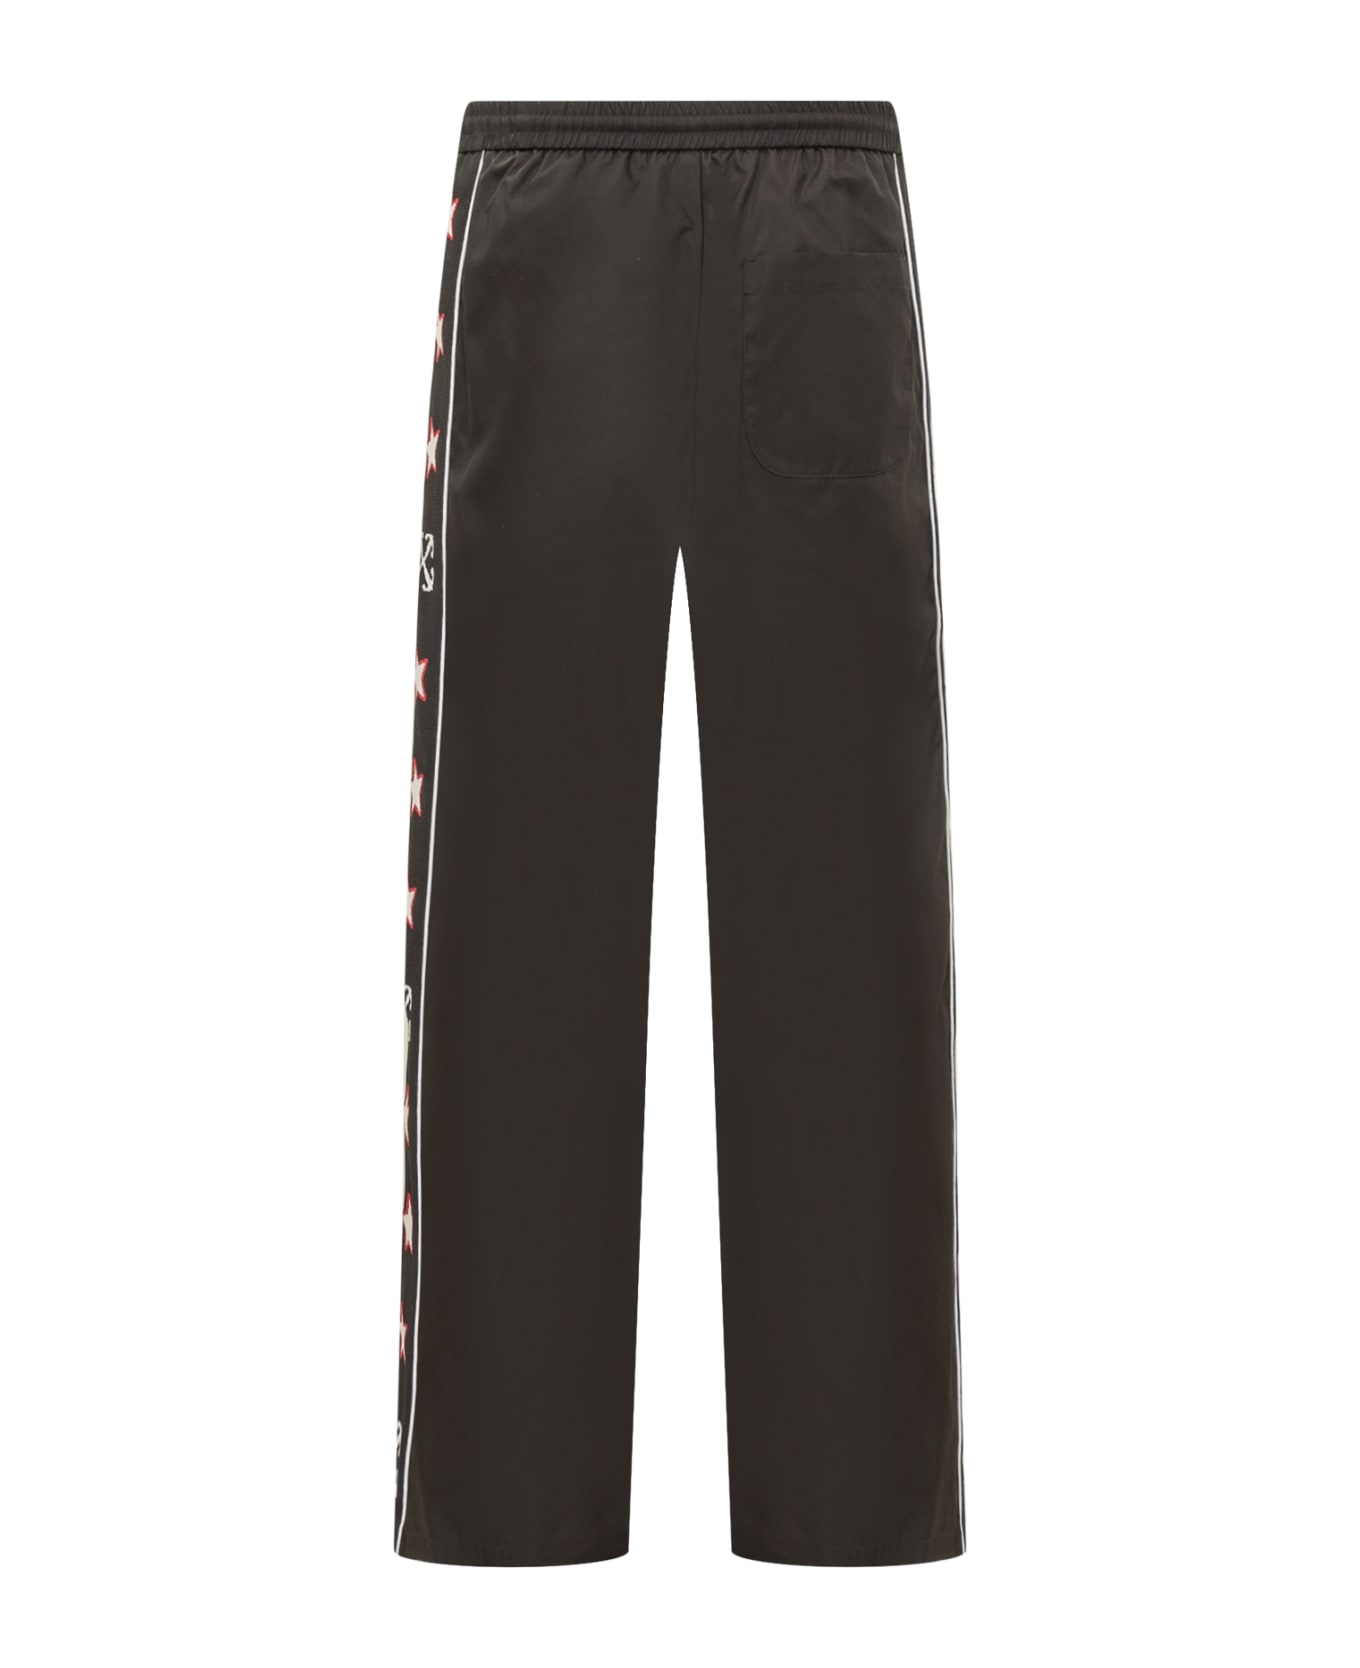 Off-White Nature Lover Pants - Black ボトムス